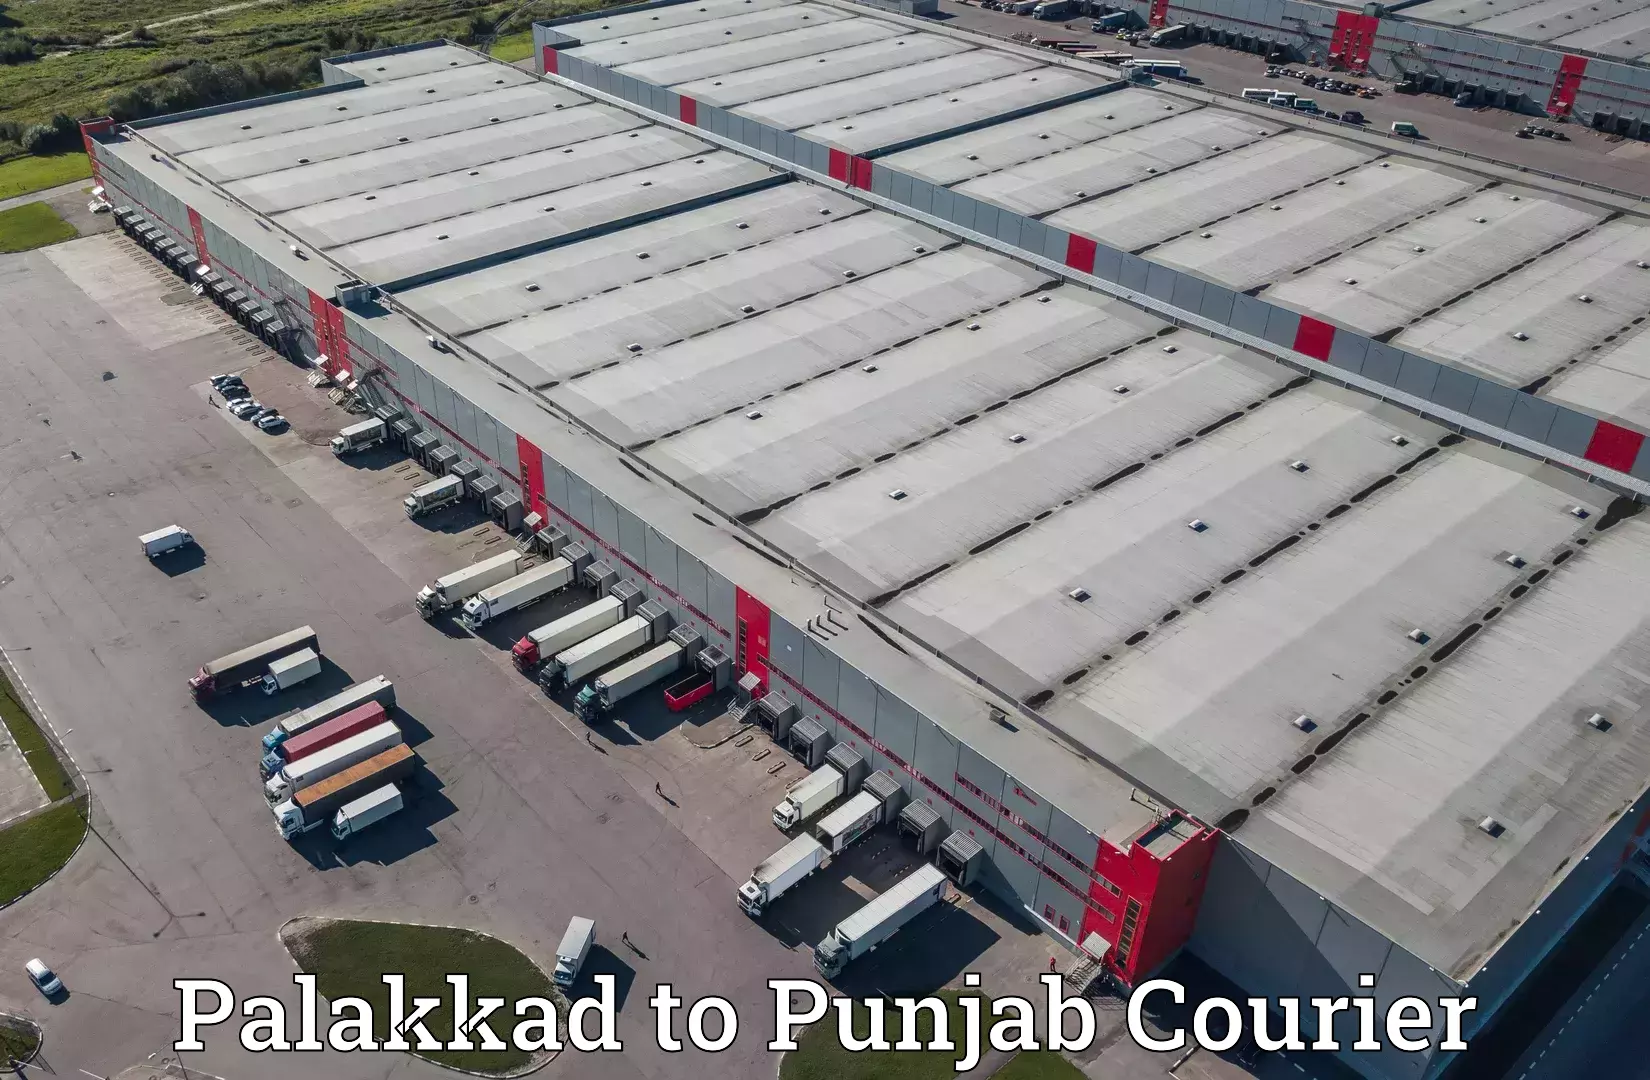 Express delivery capabilities Palakkad to Pathankot